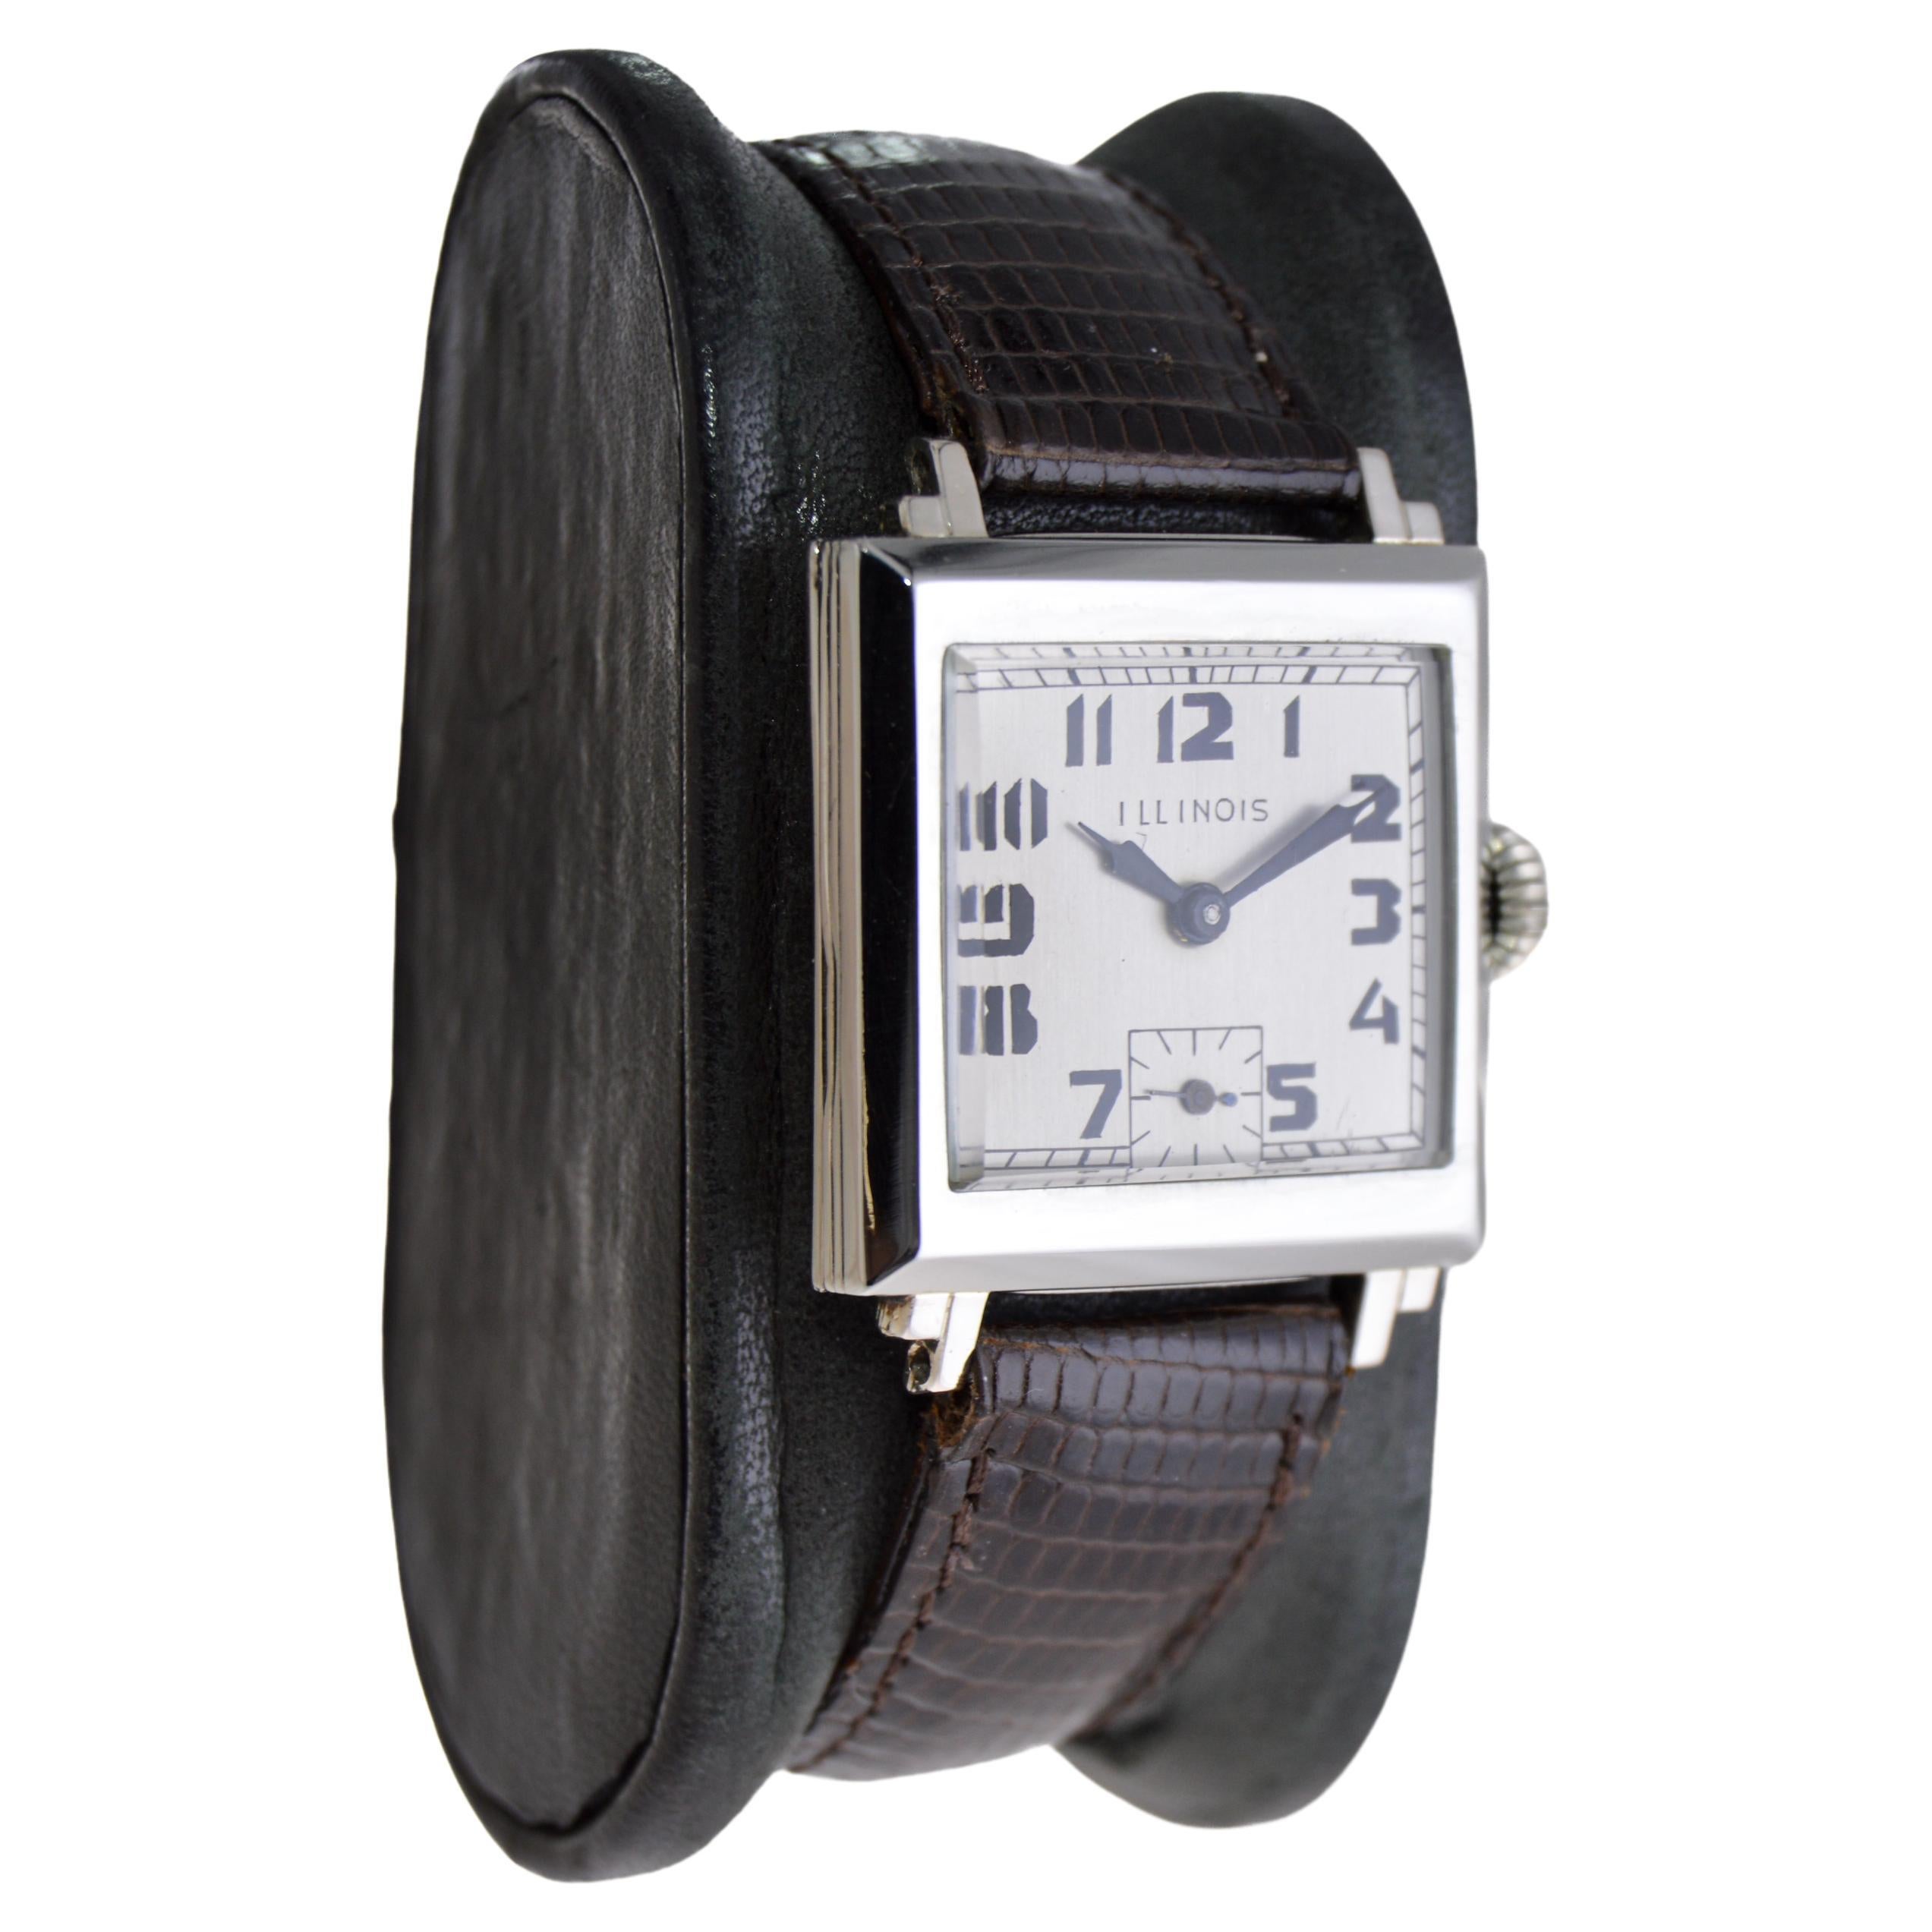 FACTORY / HOUSE: Illinois Watch Company
STYLE / REFERENCE: Commodore / Art Deco
METAL / MATERIAL: White Gold Filled
CIRCA / YEAR: 1930's
DIMENSIONS / SIZE: 27mm Length X 34mm Width
MOVEMENT / CALIBER: Manual Winding / 15 Jewels / Caliber 605
DIAL /